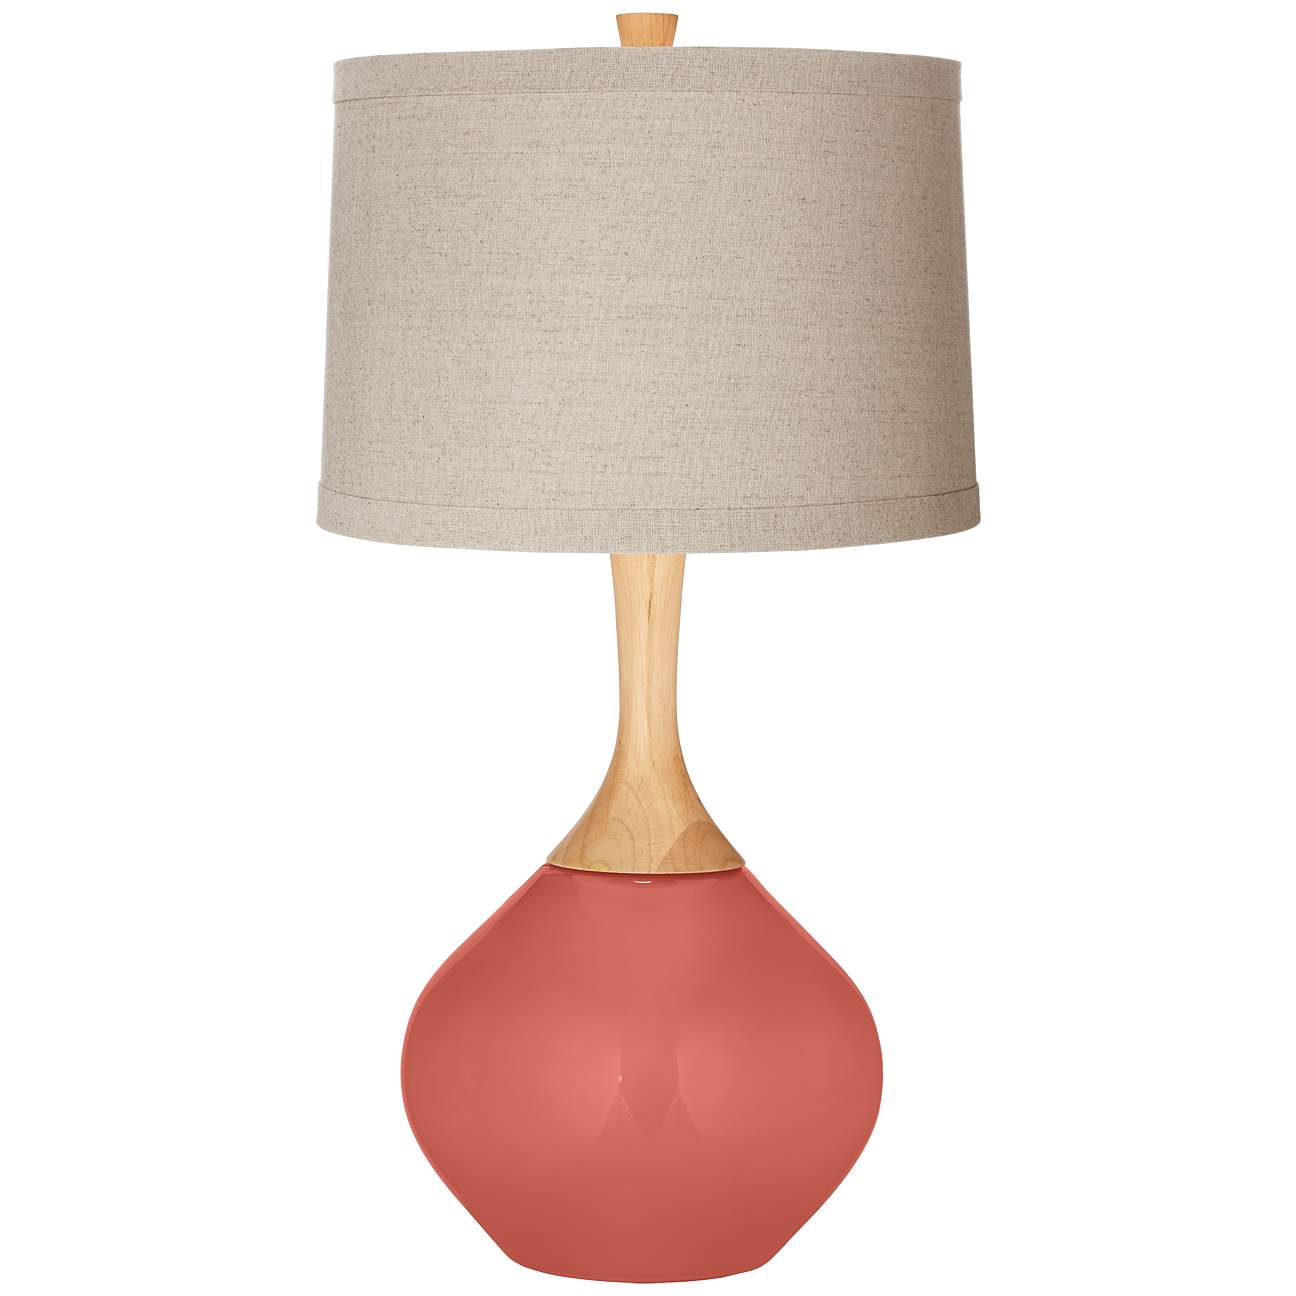 Coral Reef Natural Linen Drum Shade Wexler Table Lamp - #53F34 | Lamps Plus